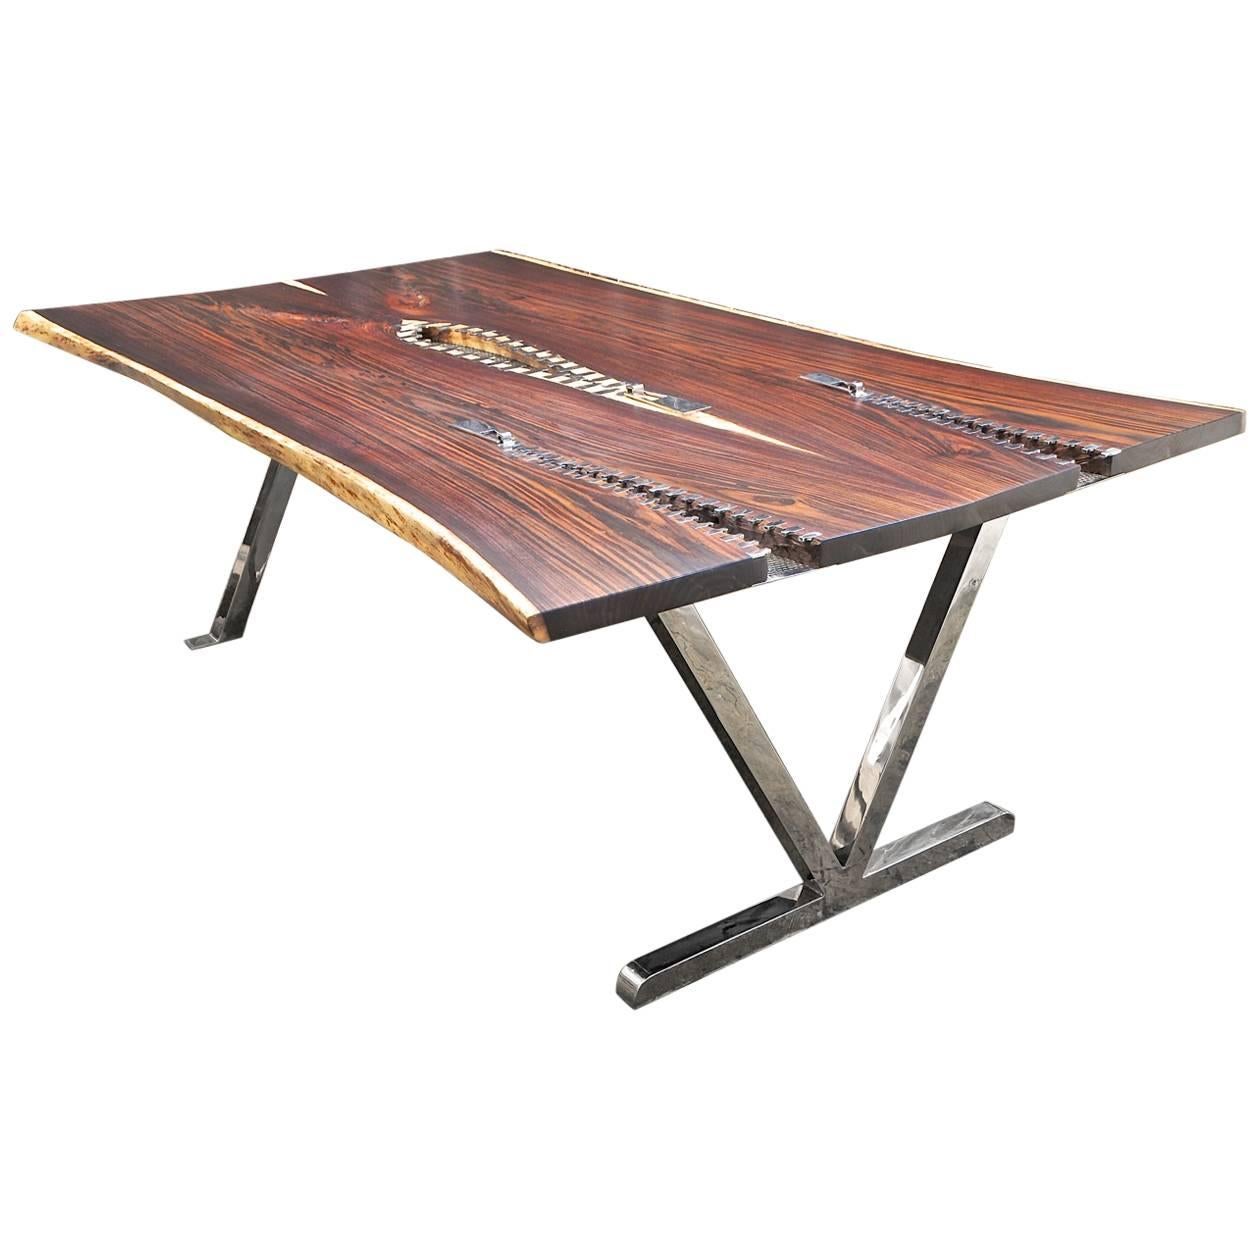 AVe Perfecto Table Made of Rosewood and Mirror Polished Stainless Steel